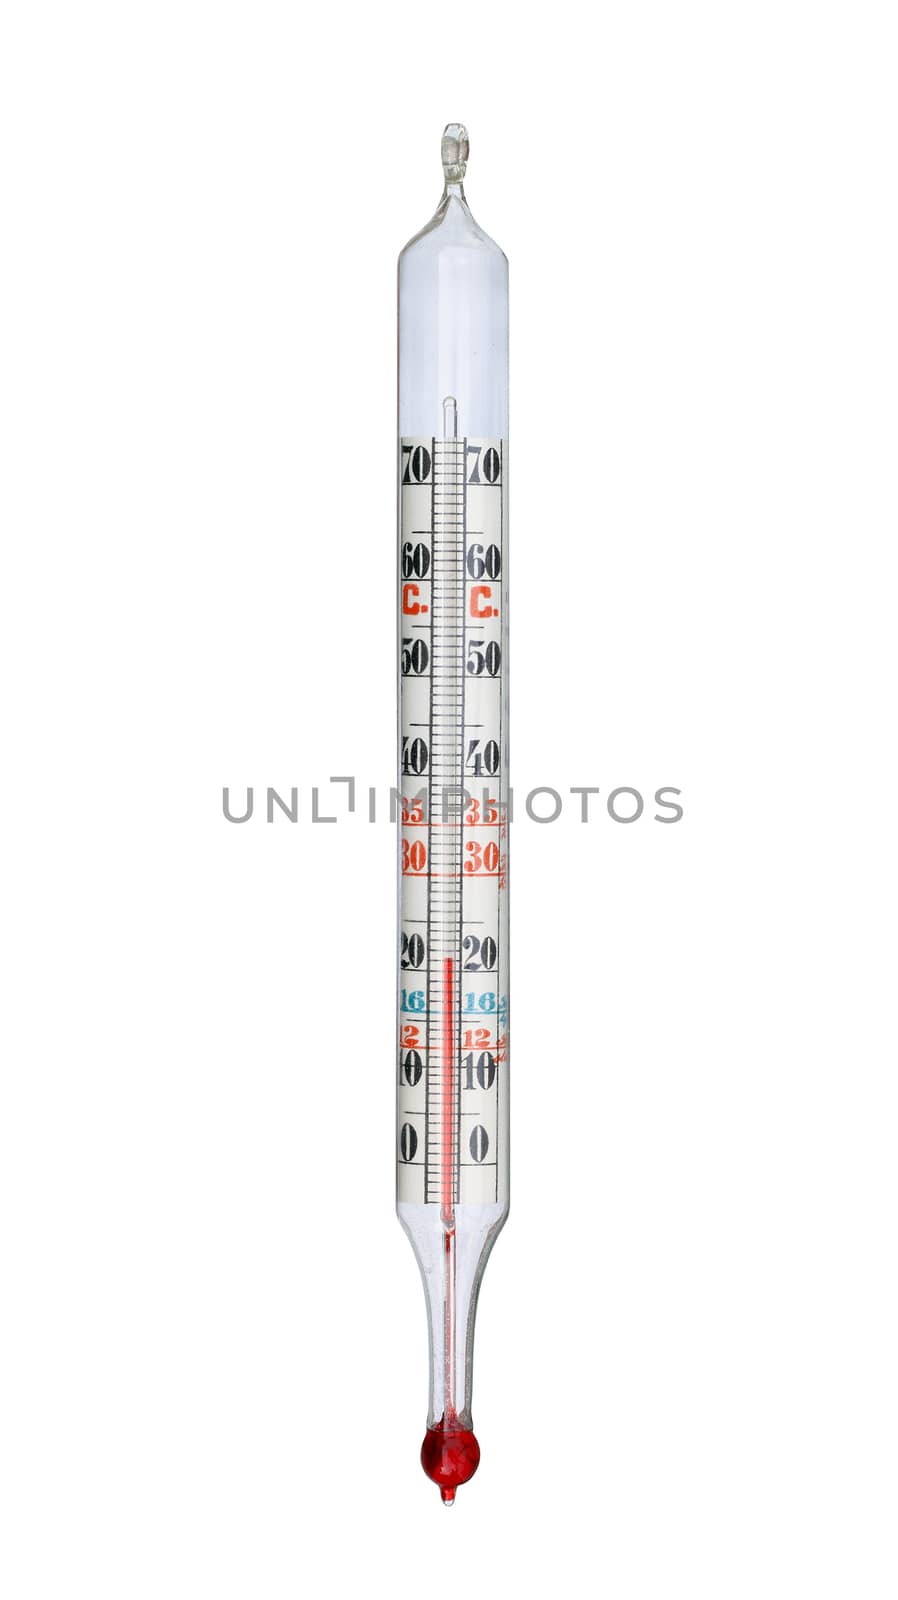 Old mercury glass thermometer on white background by Mibuch